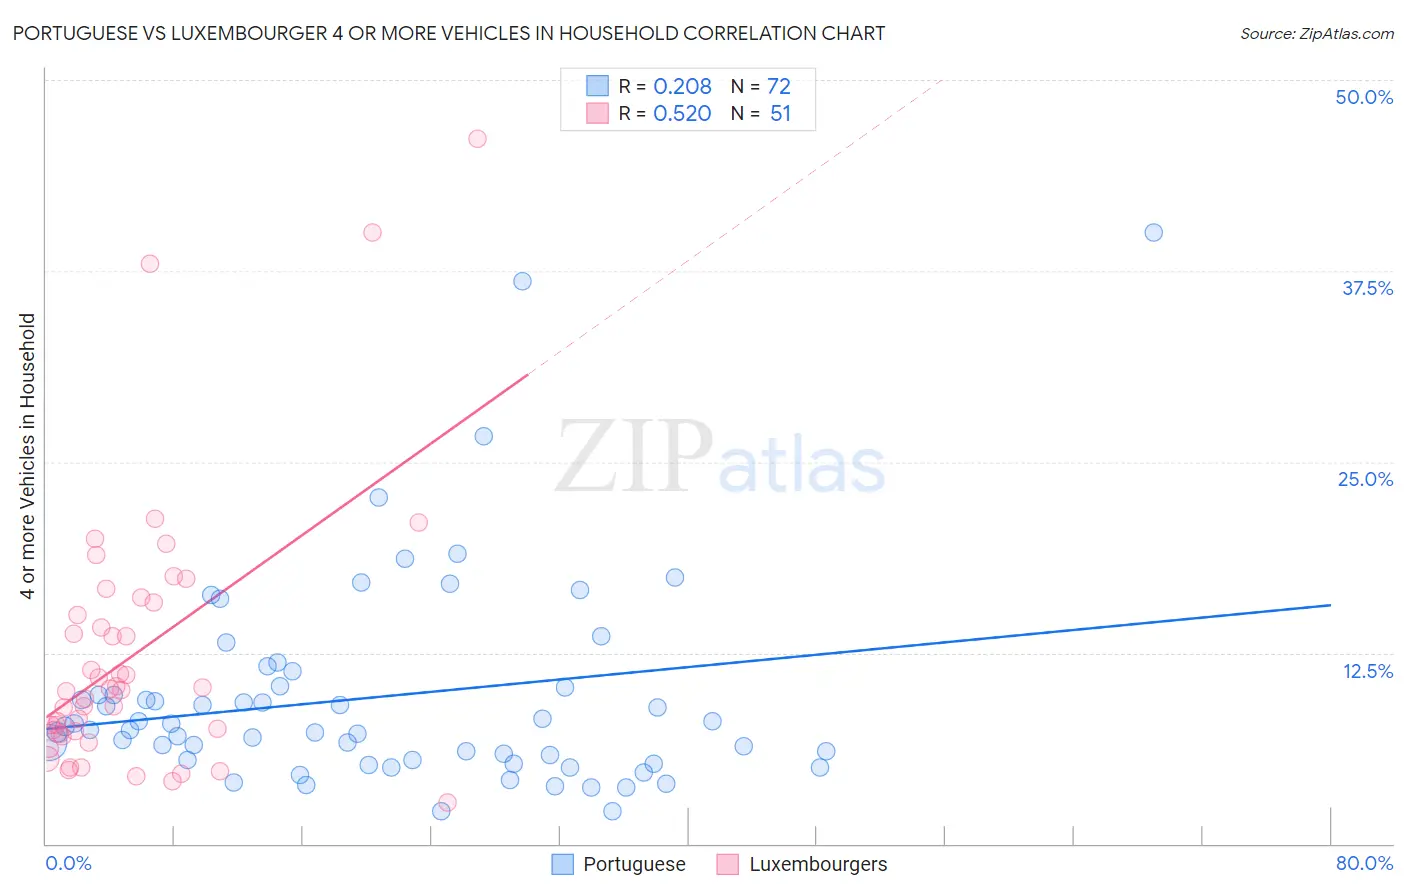 Portuguese vs Luxembourger 4 or more Vehicles in Household